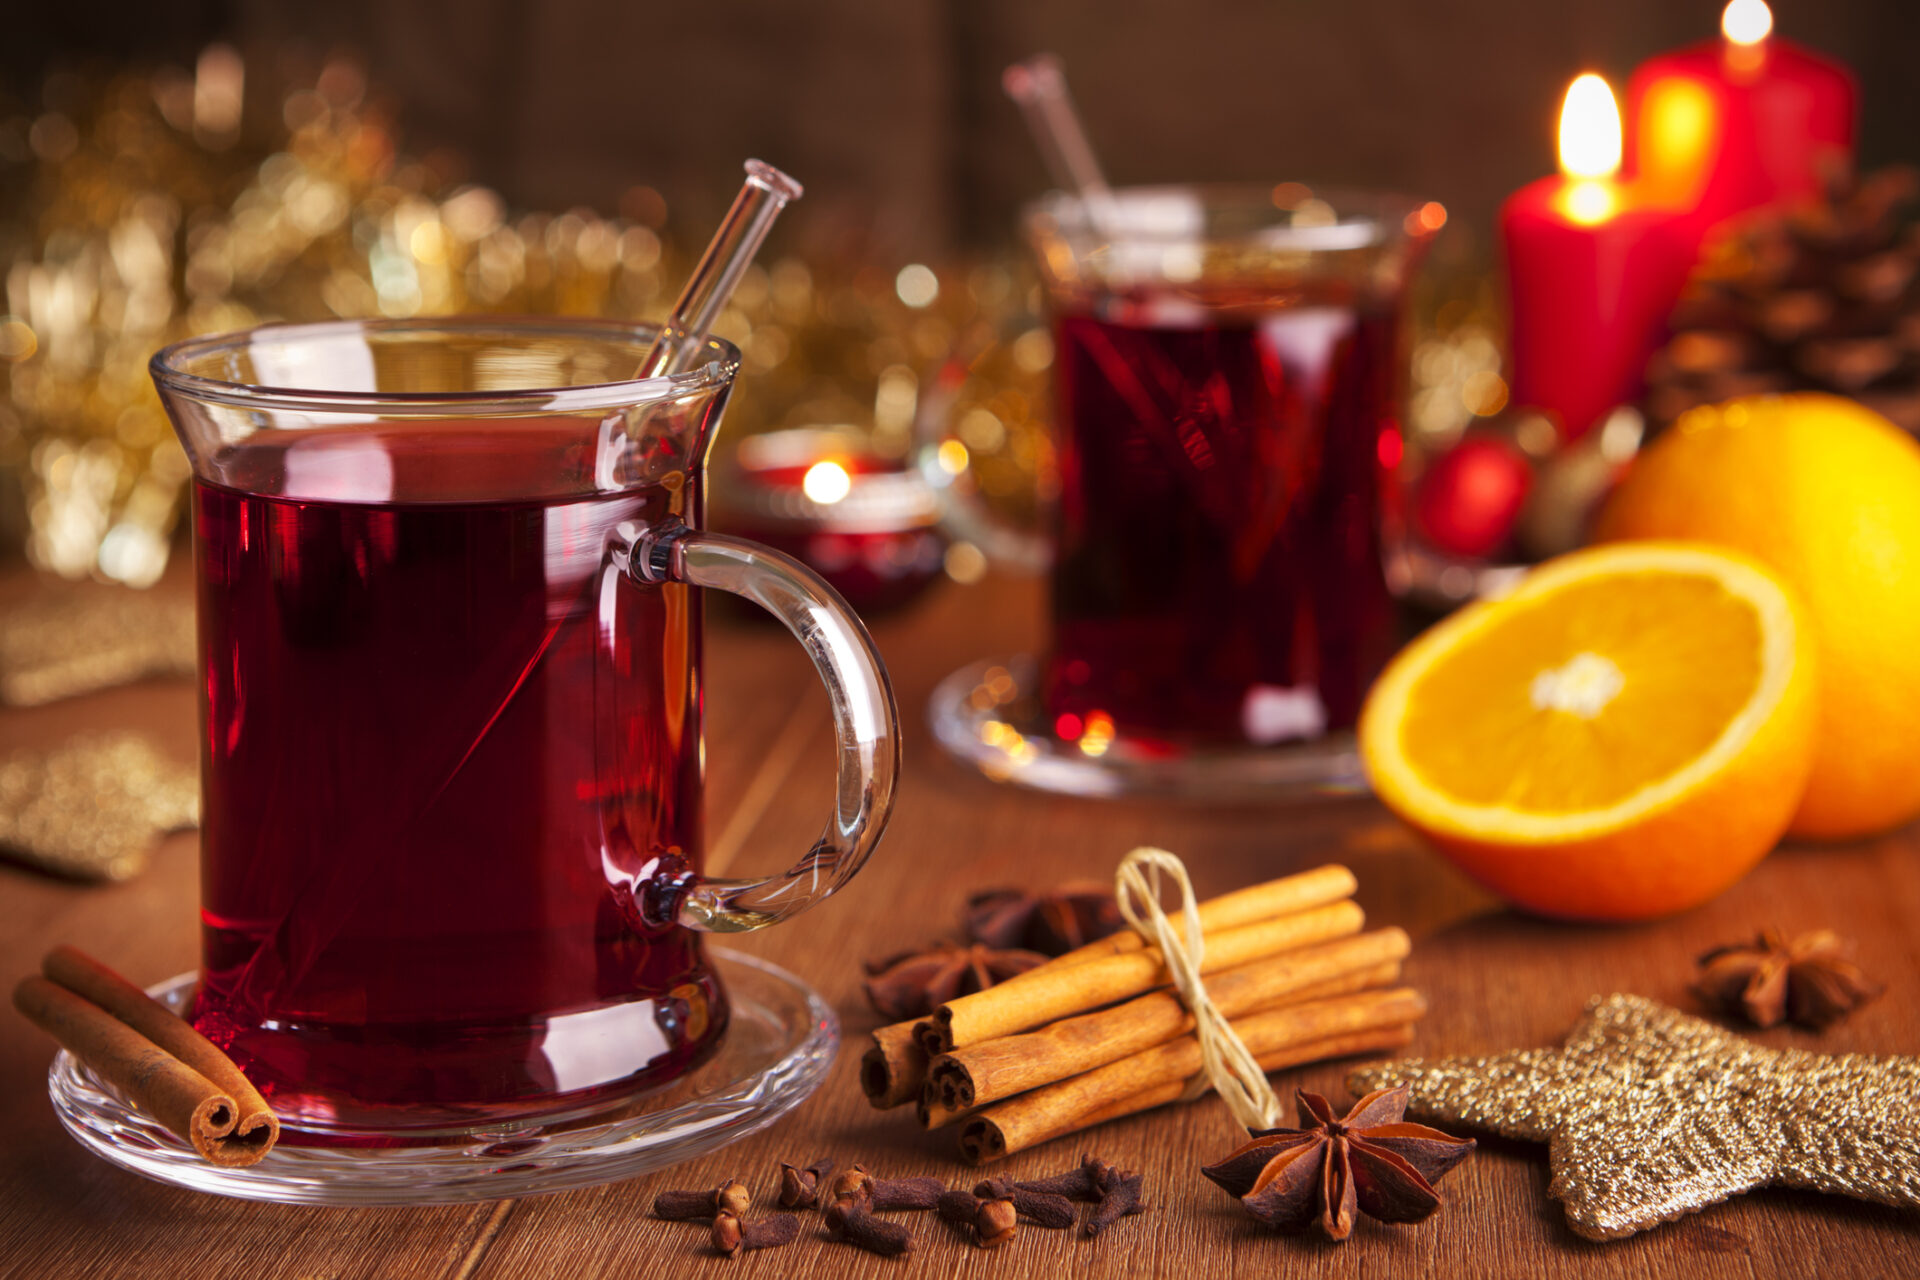 Glühwein, a hot winter drink with spices and oranges. (Photo: iStockphoto)